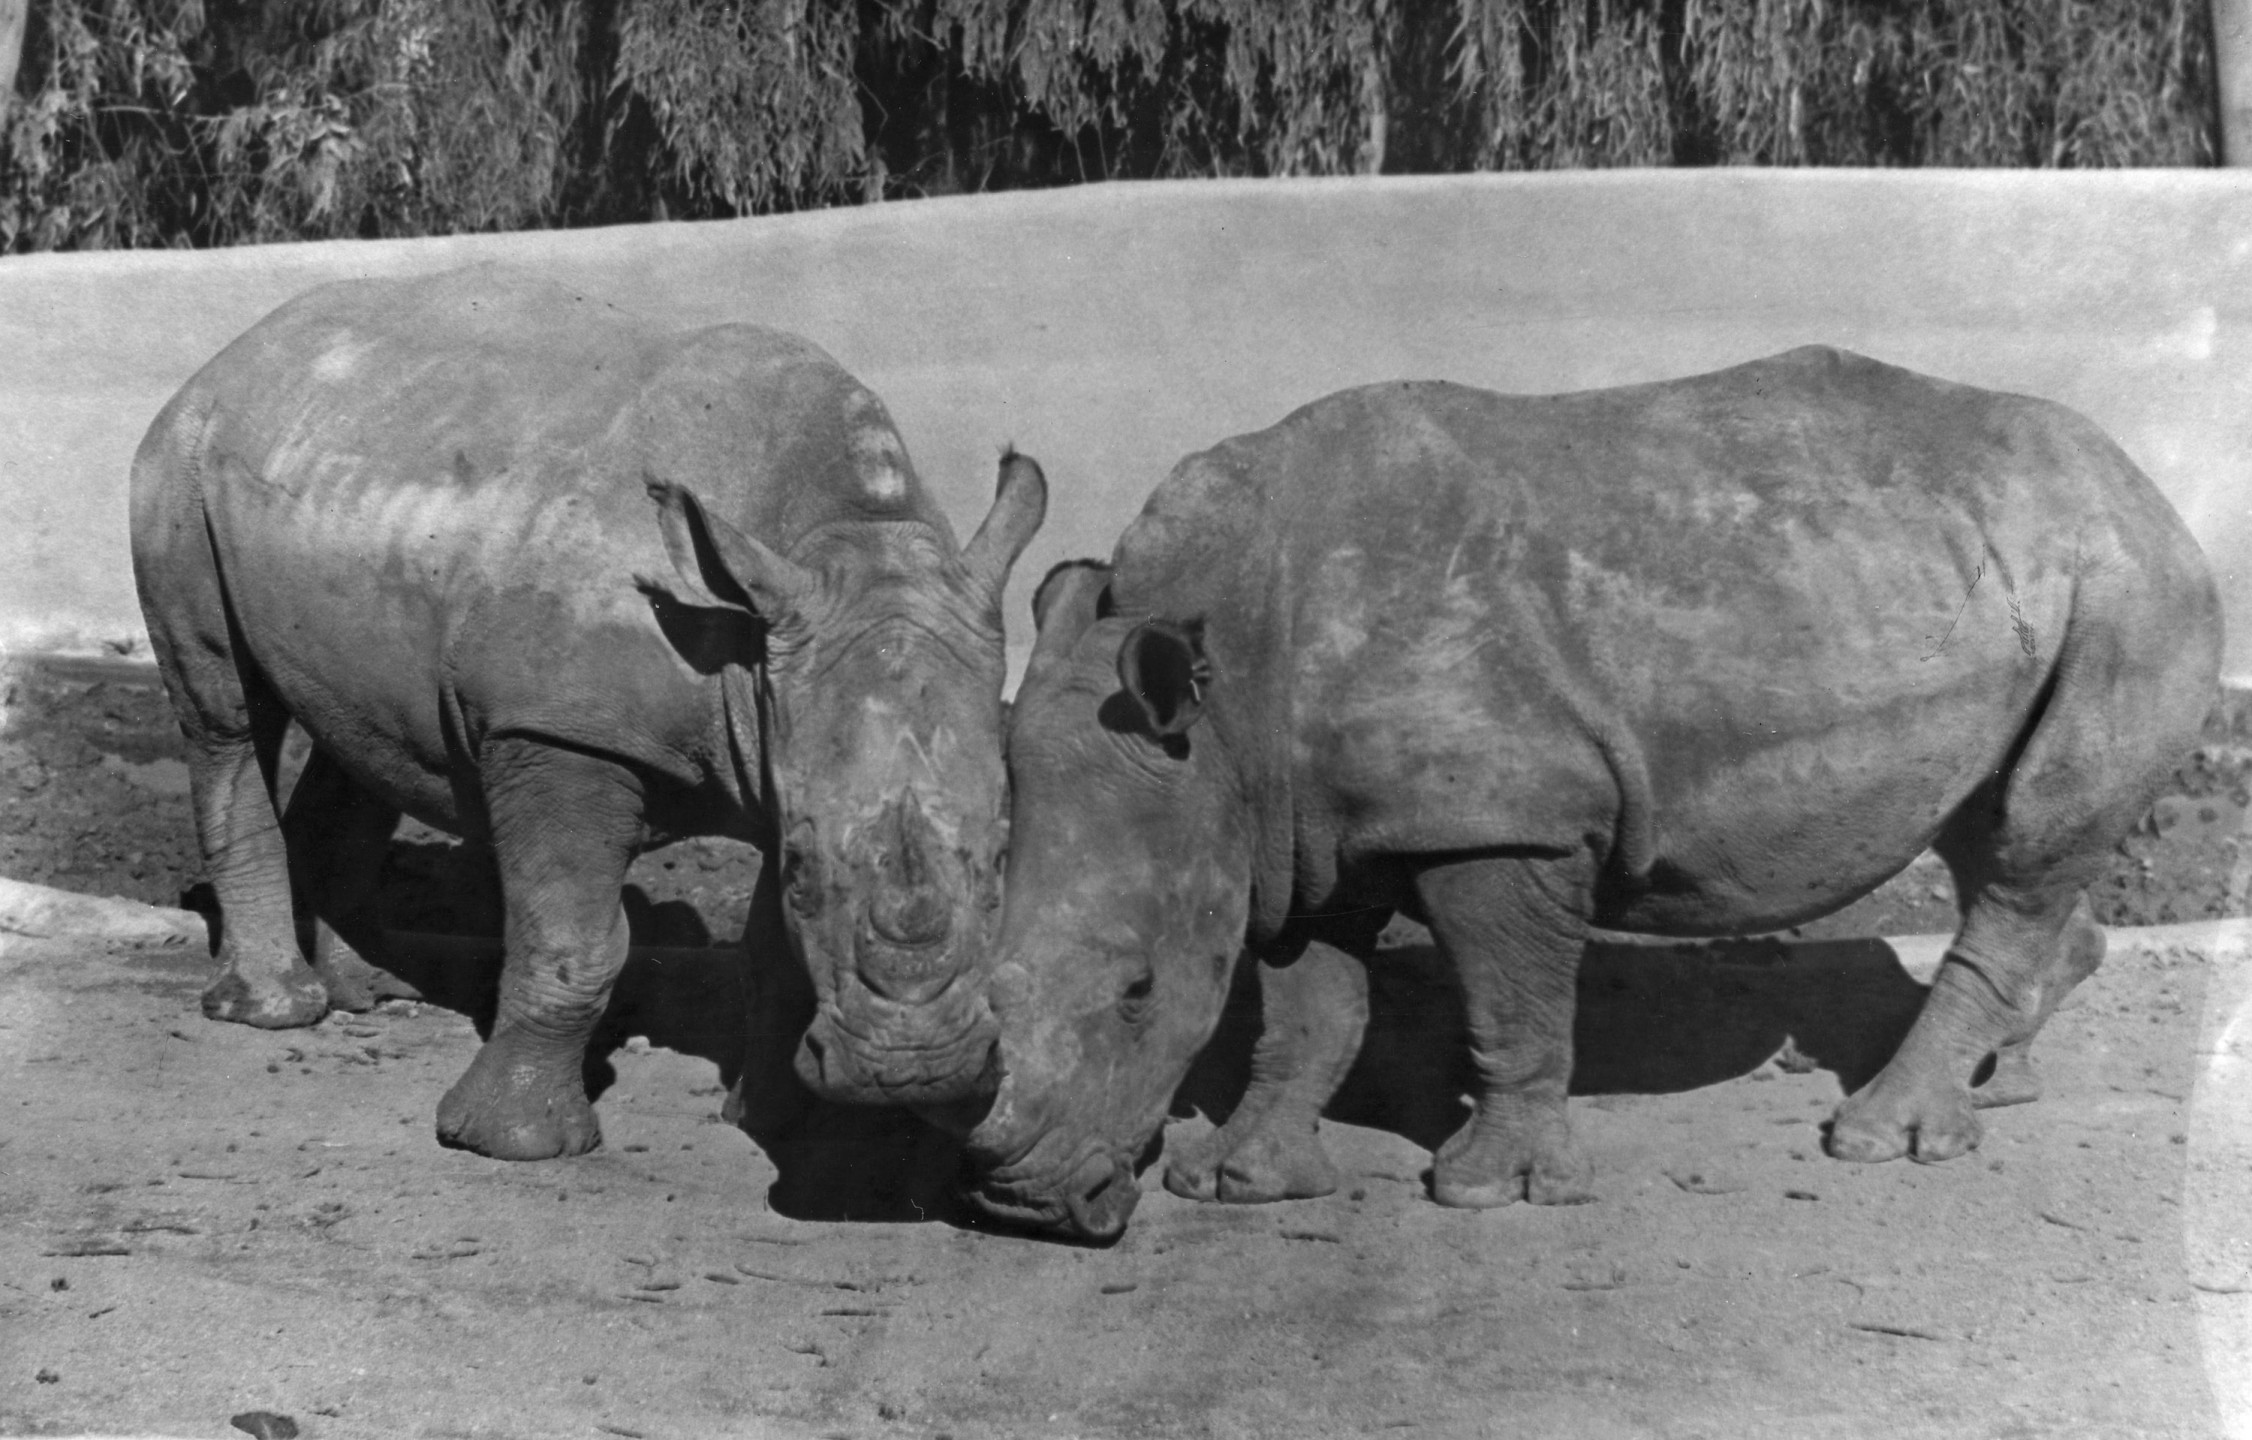 The San Diego Zoo had long hoped for a pair of white rhinos. The arrival of 1,655-pound Mandhla (meaning 